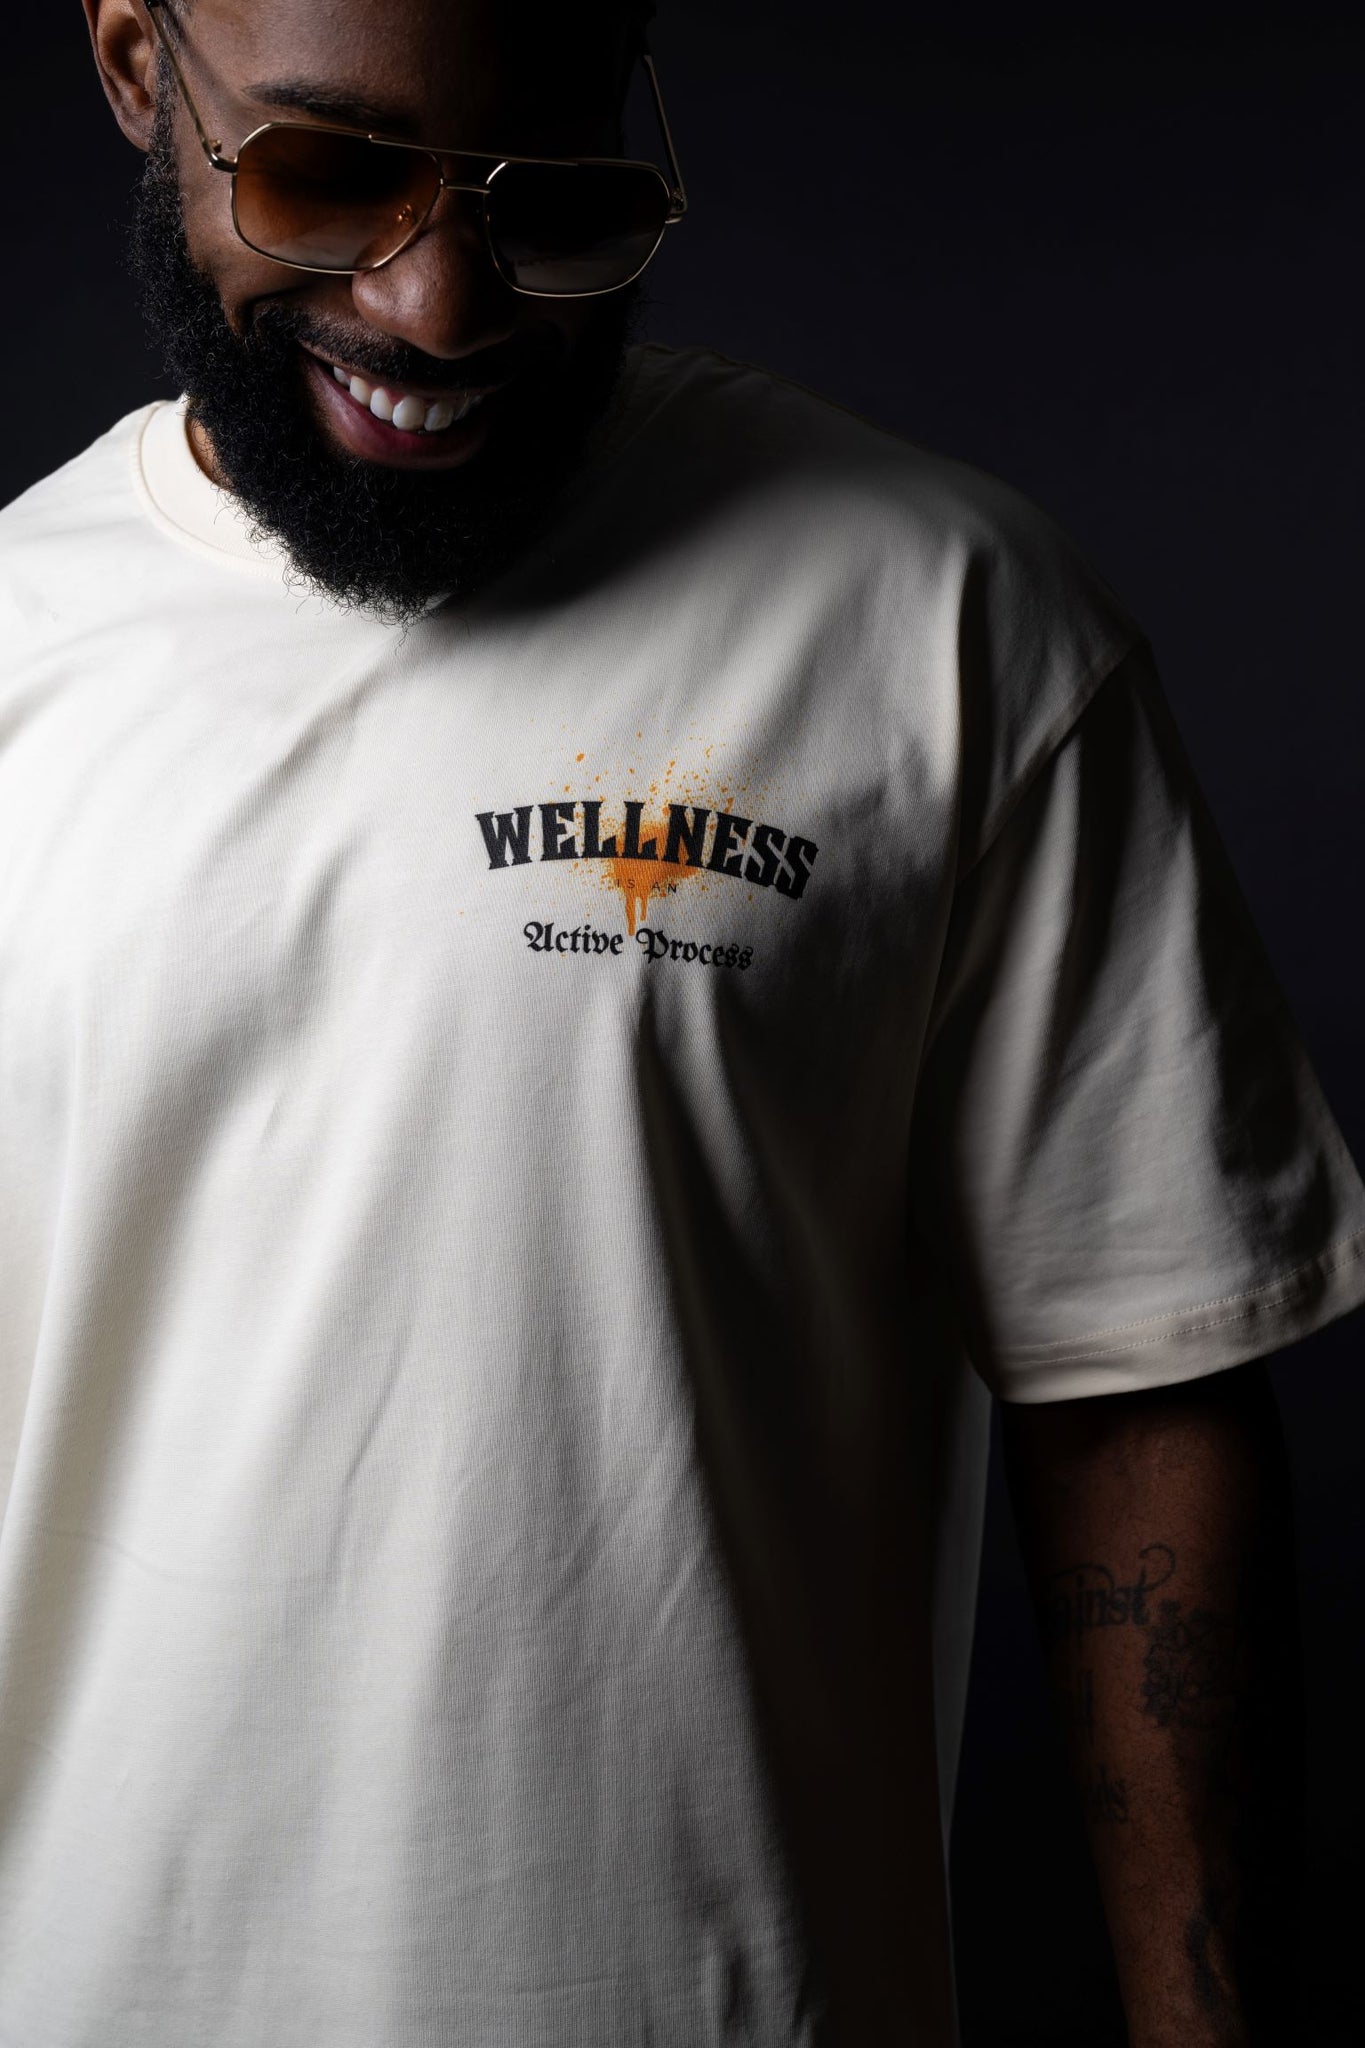 Wellness Special Edition Graphic Tee